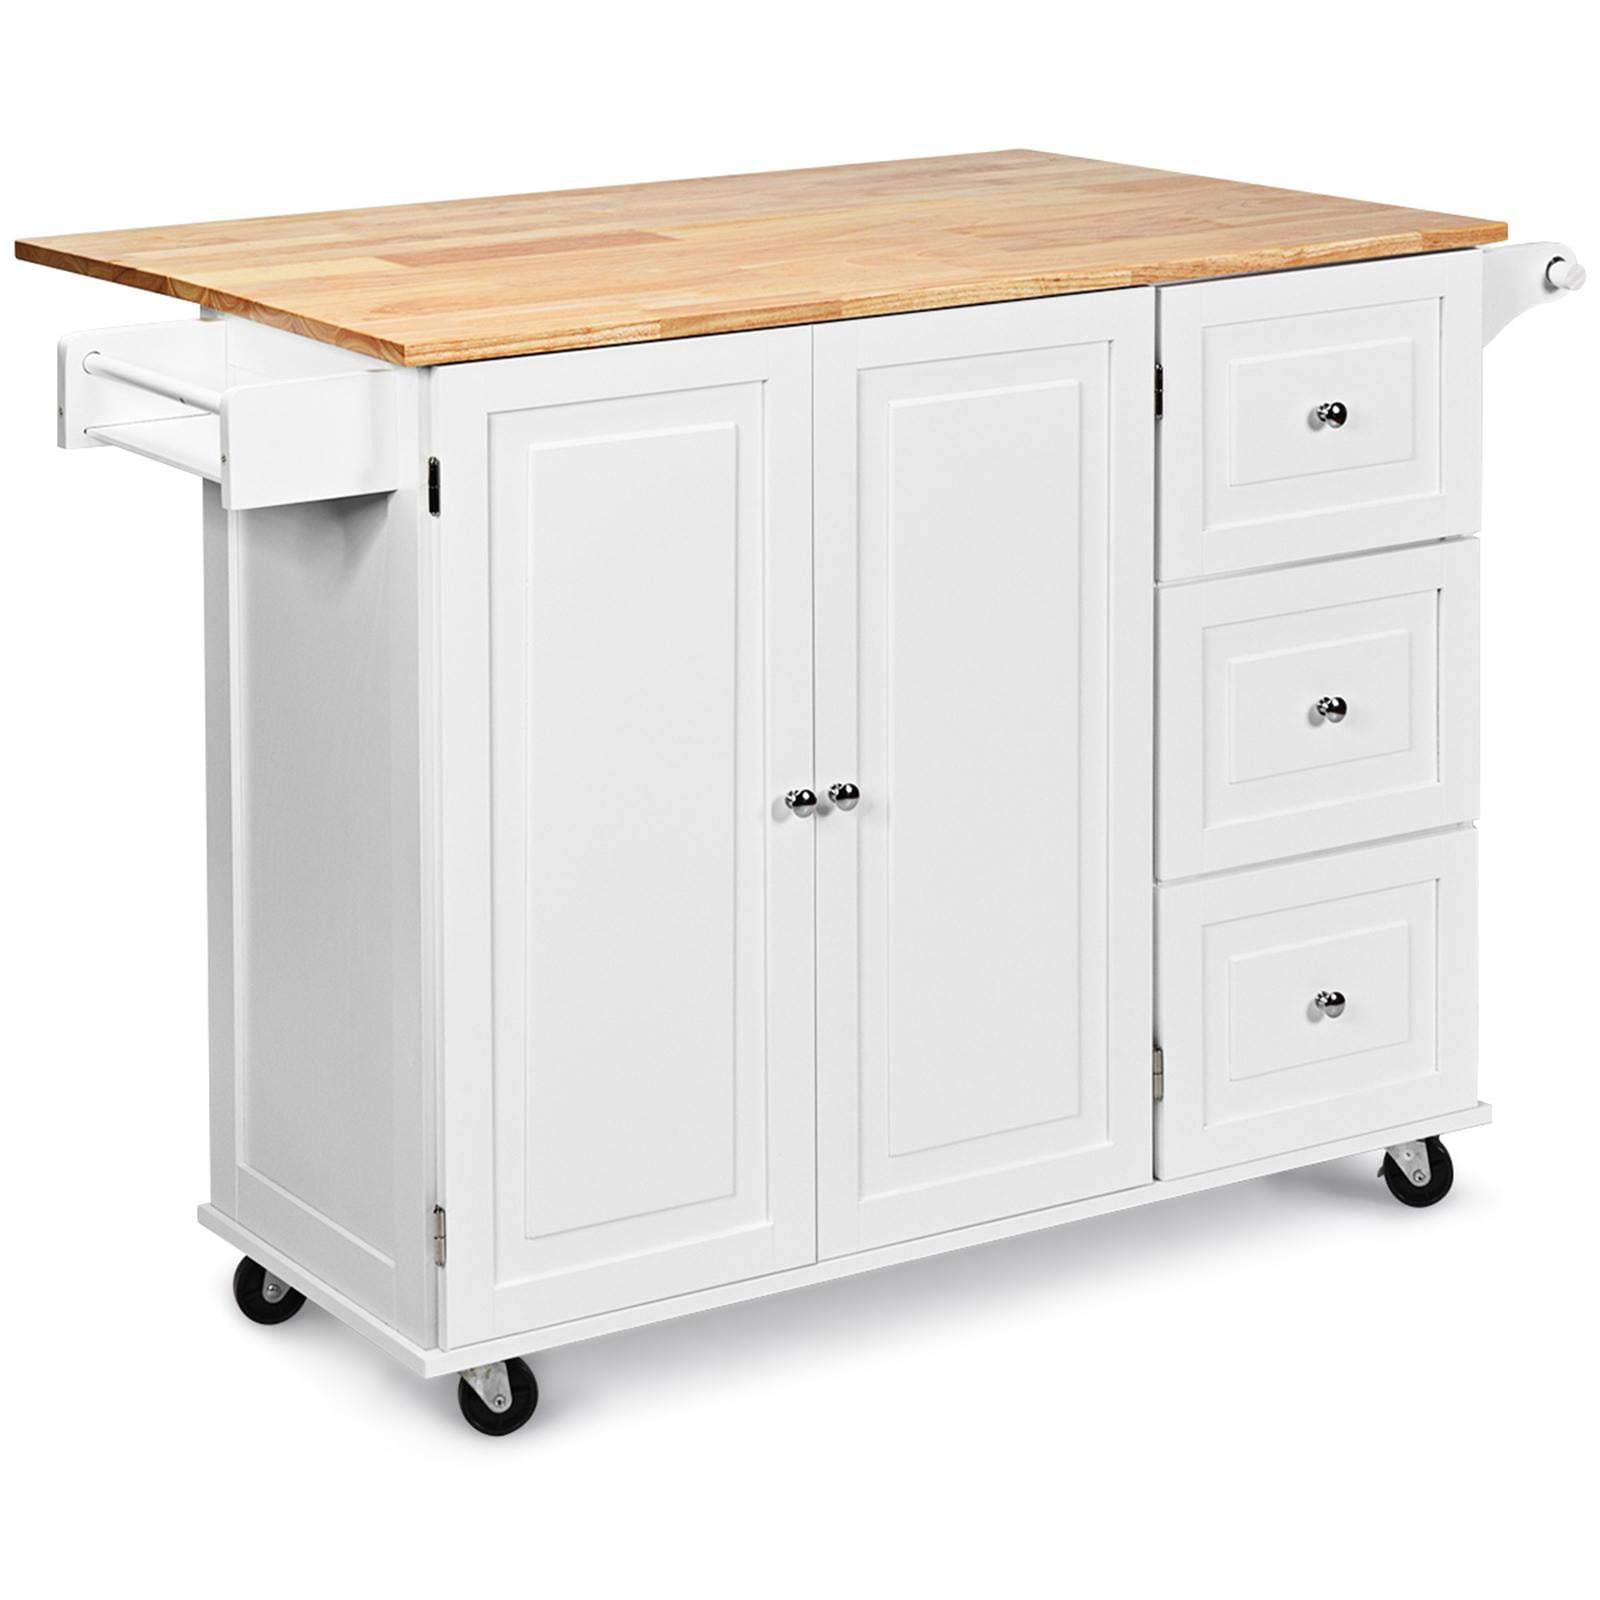 HOMCOM Kitchen Island with Drop Leaf Trolley Cart on Wheels Drawer Cabinet Towel Racks Versatile Use Natural Wood Top and White